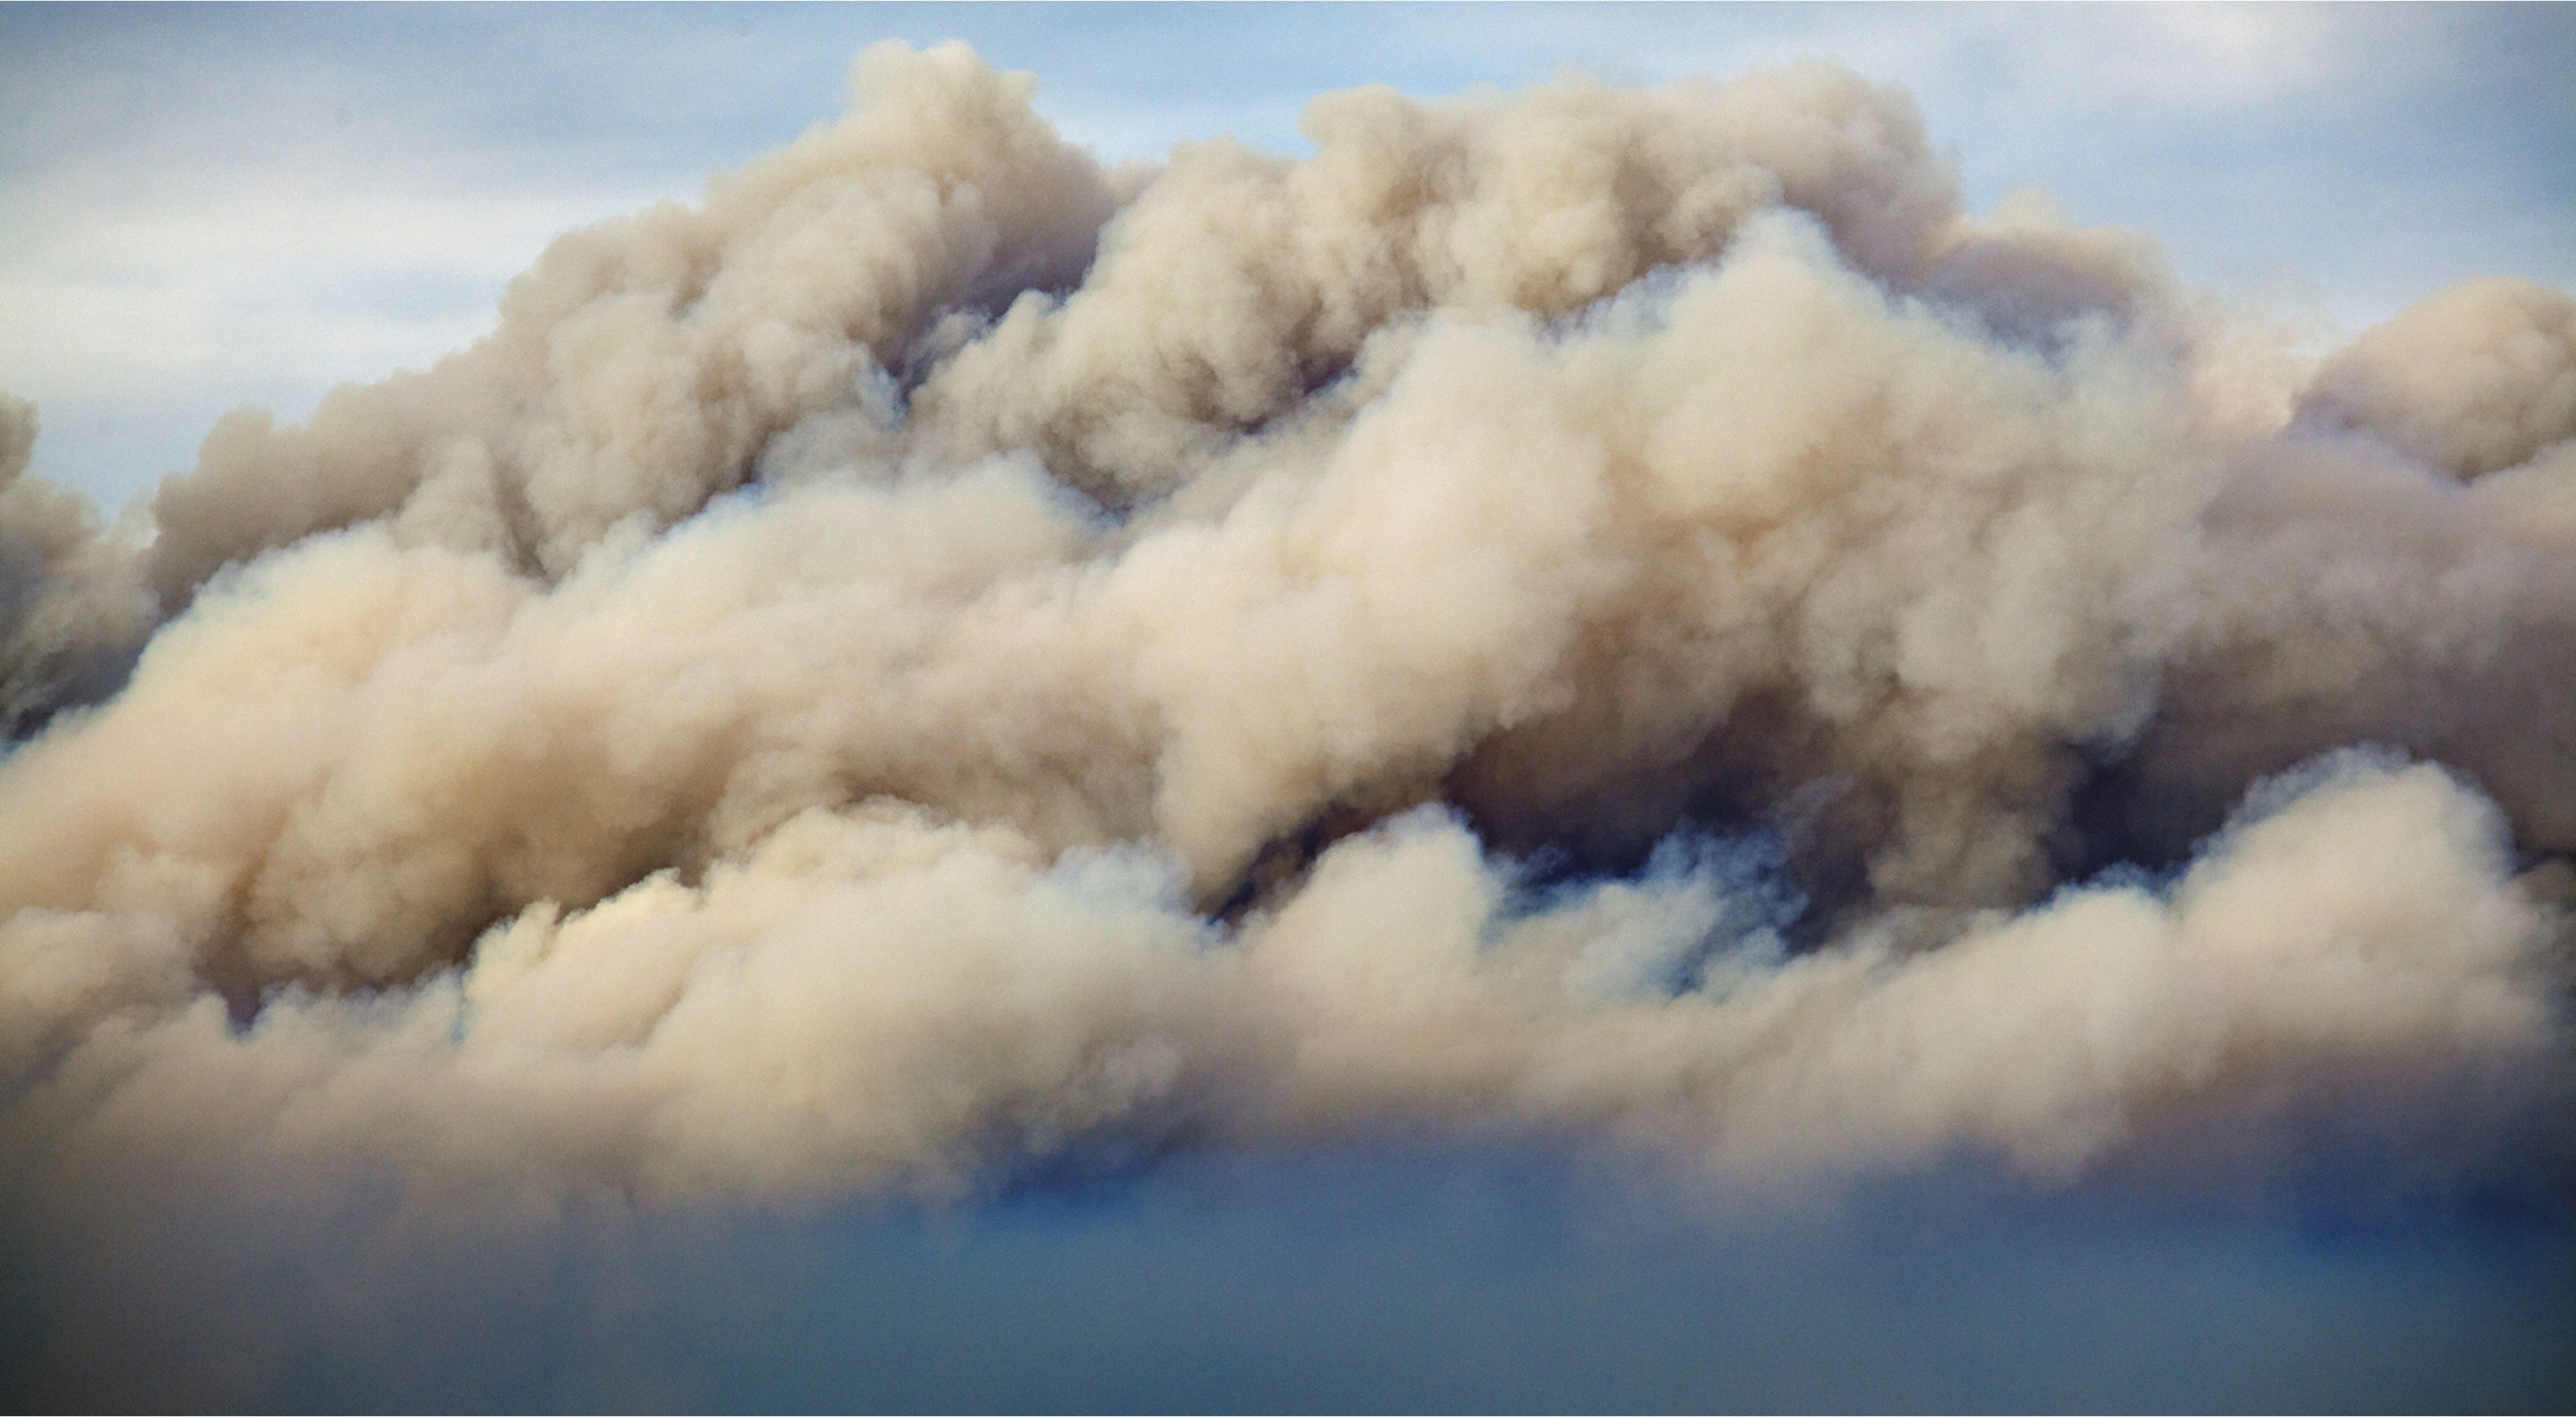 Smoke rises up during a devastating fire season in Australia. Climate change is contributing to these record fires. 